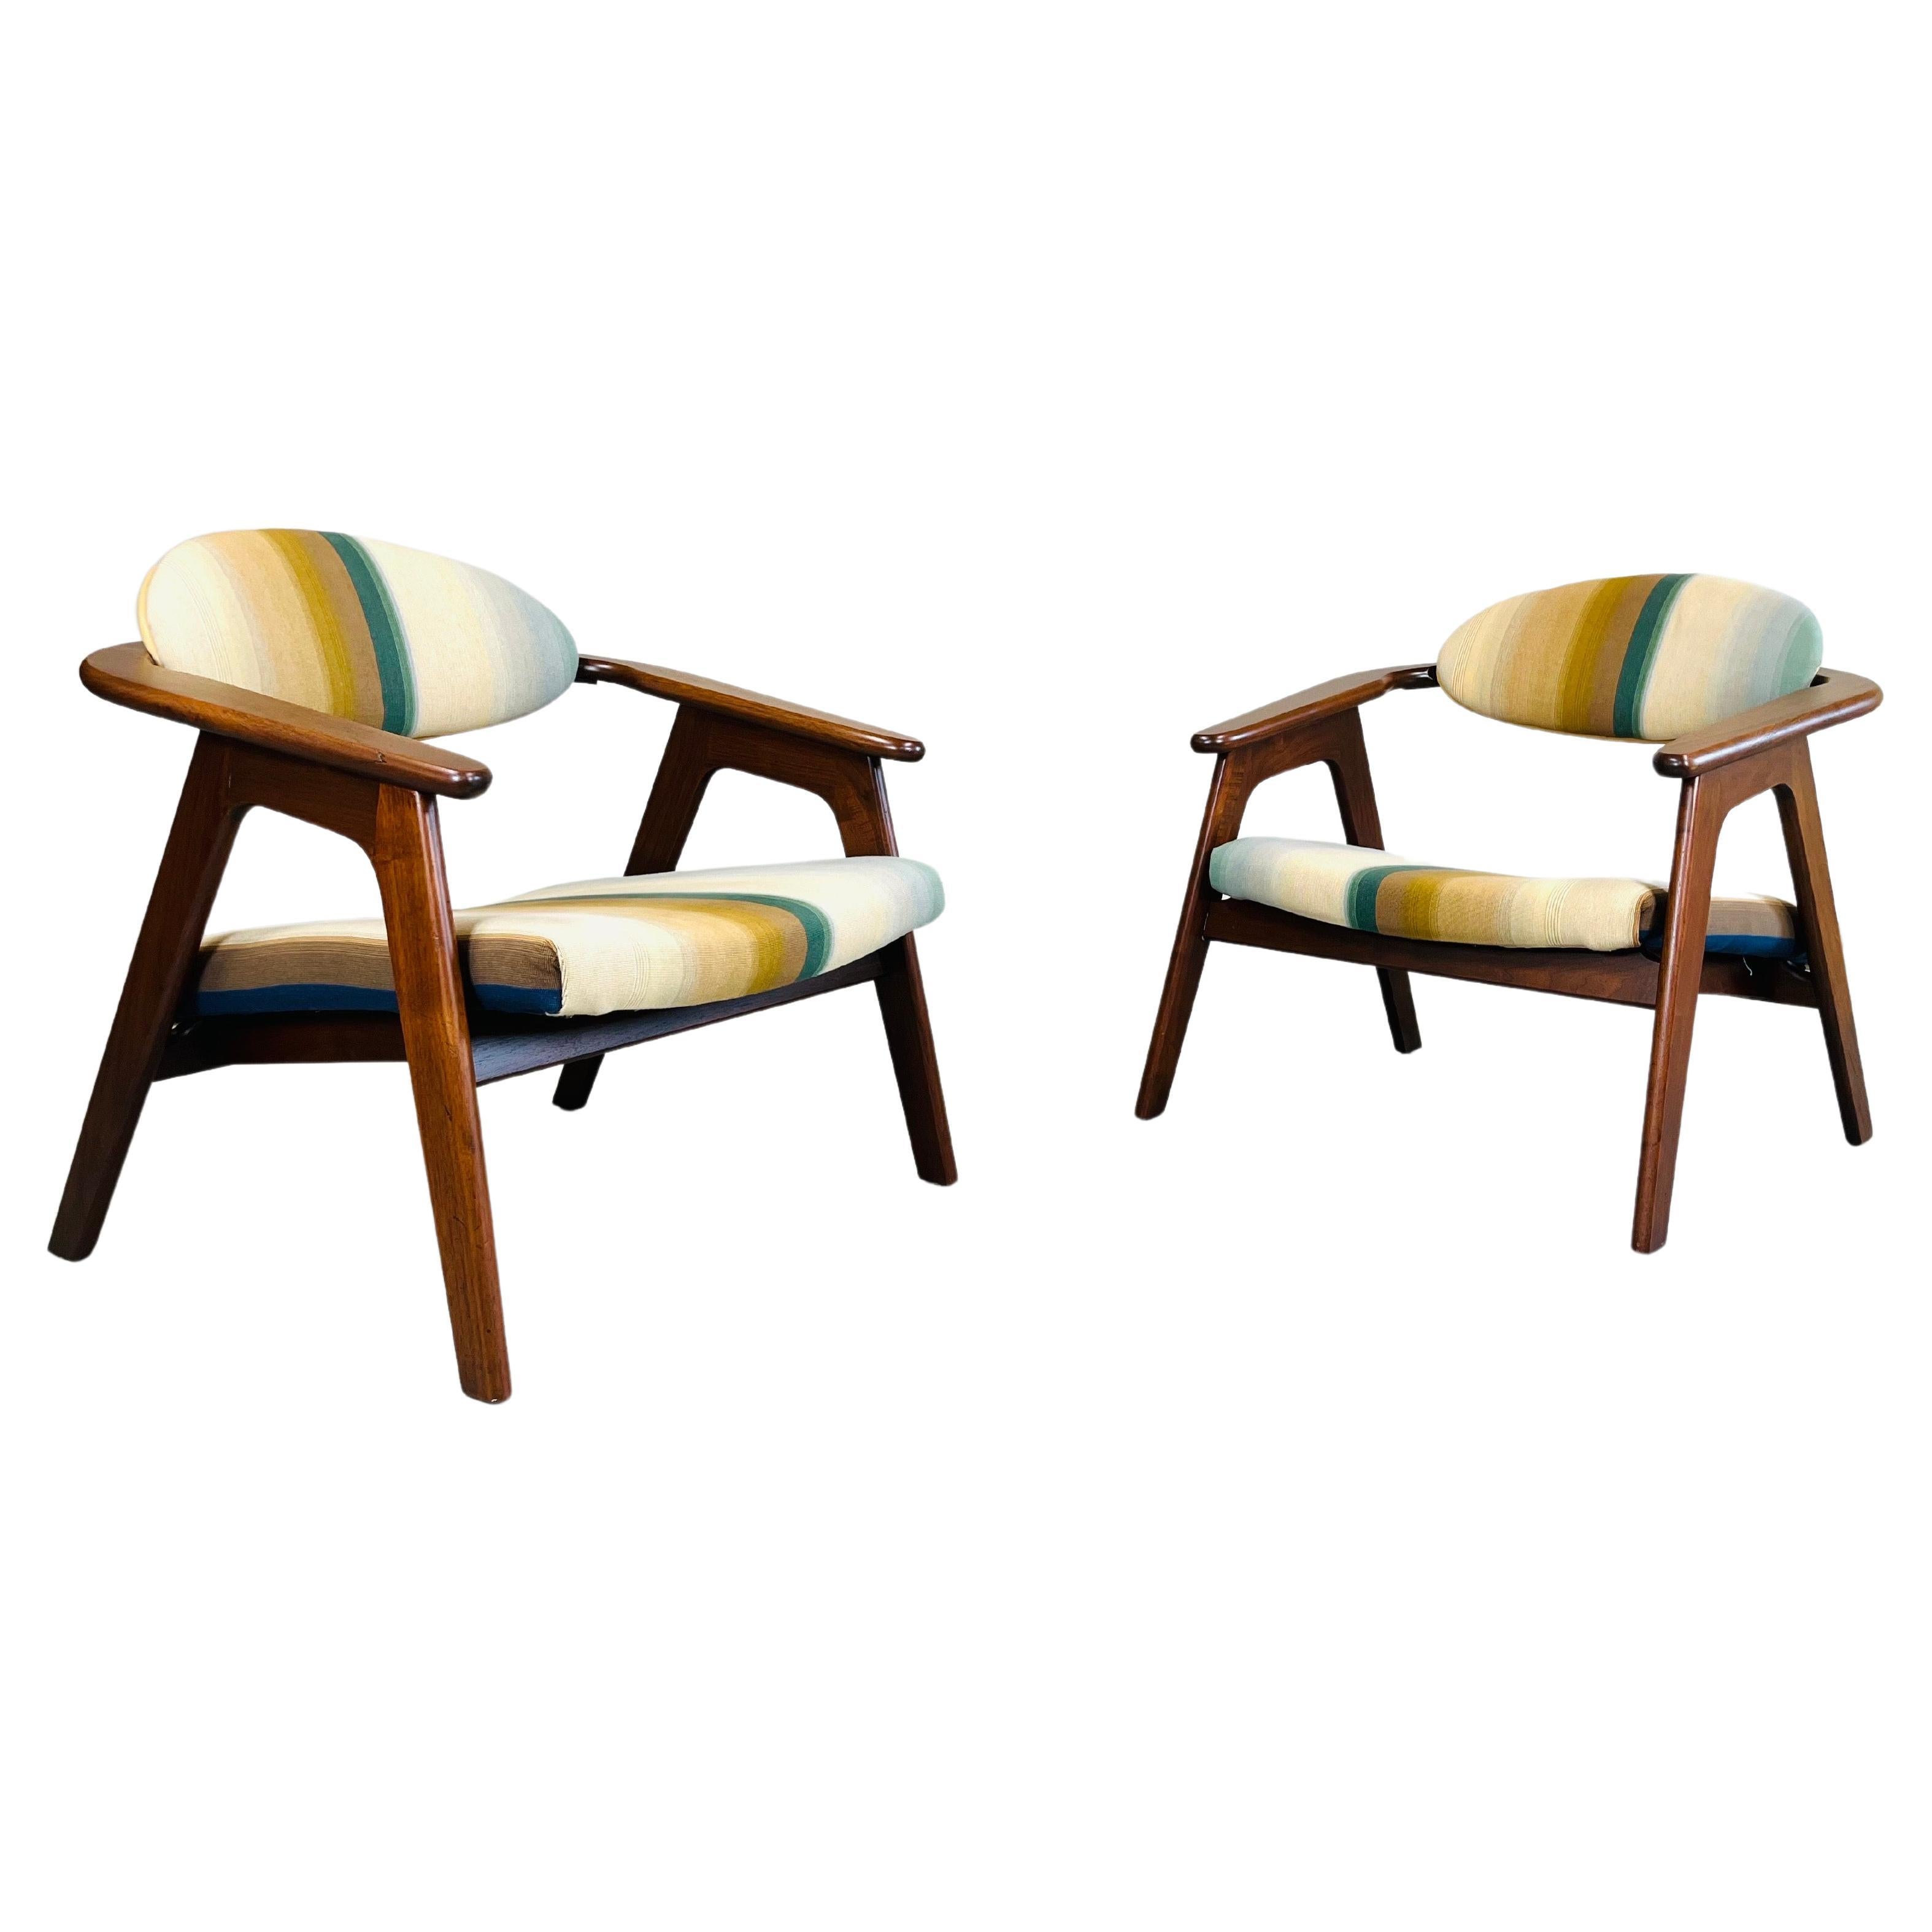 Vintage Sculptural Walnut Pair Of Adrian Pearsall ‘Captains’ Chairs  For Sale